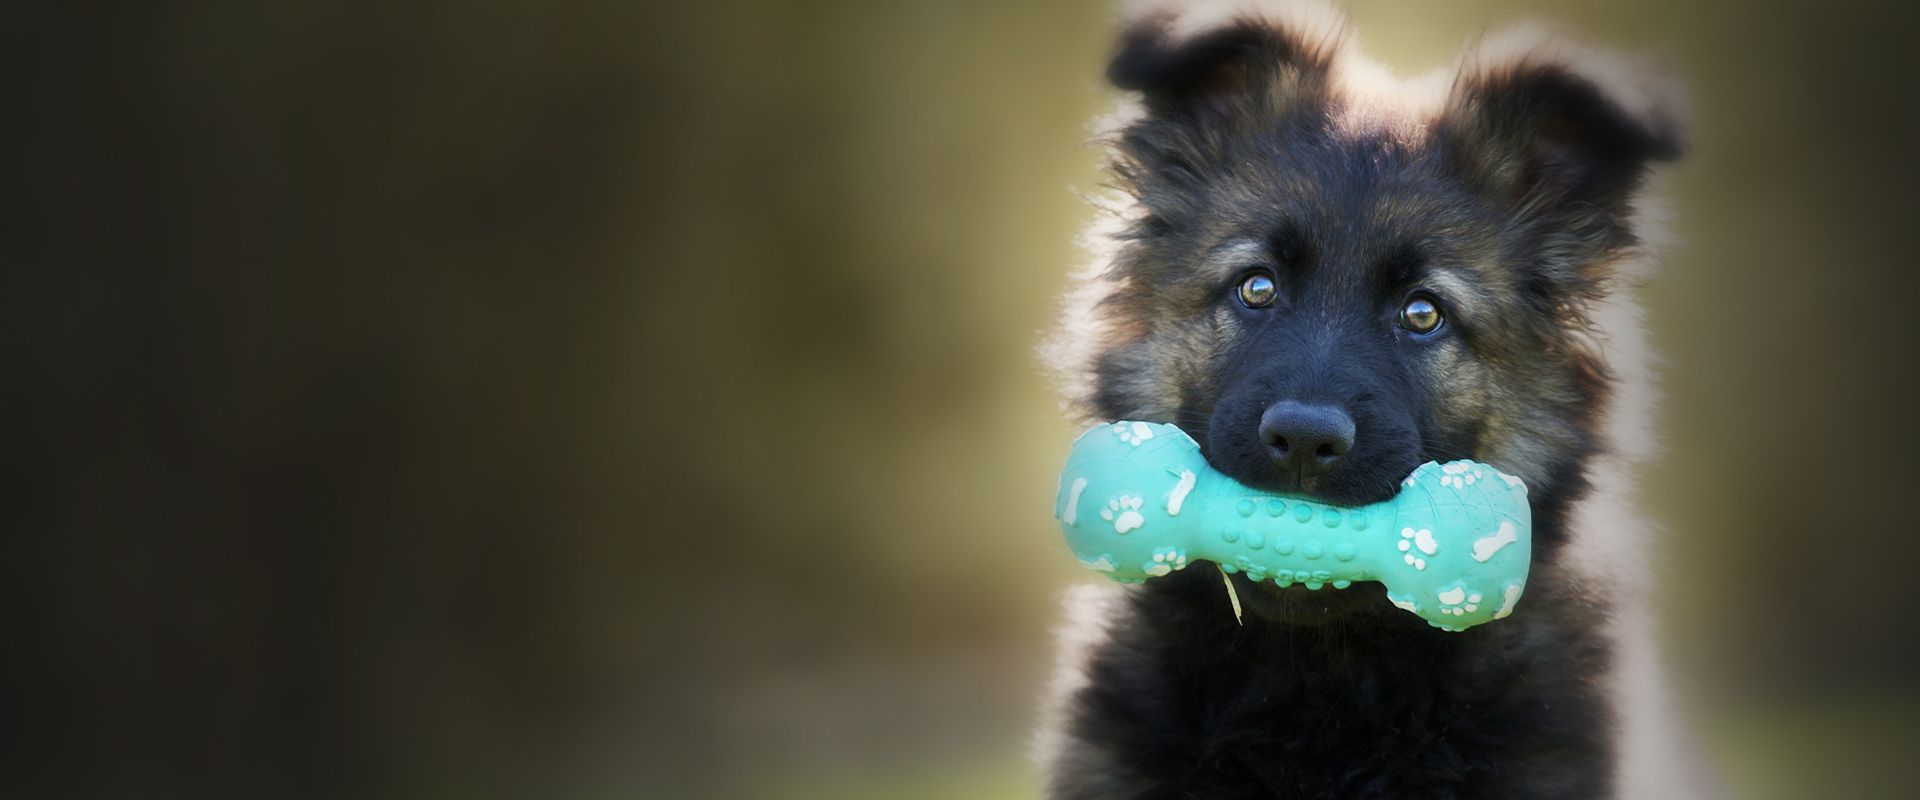 adorable dog holding a toy